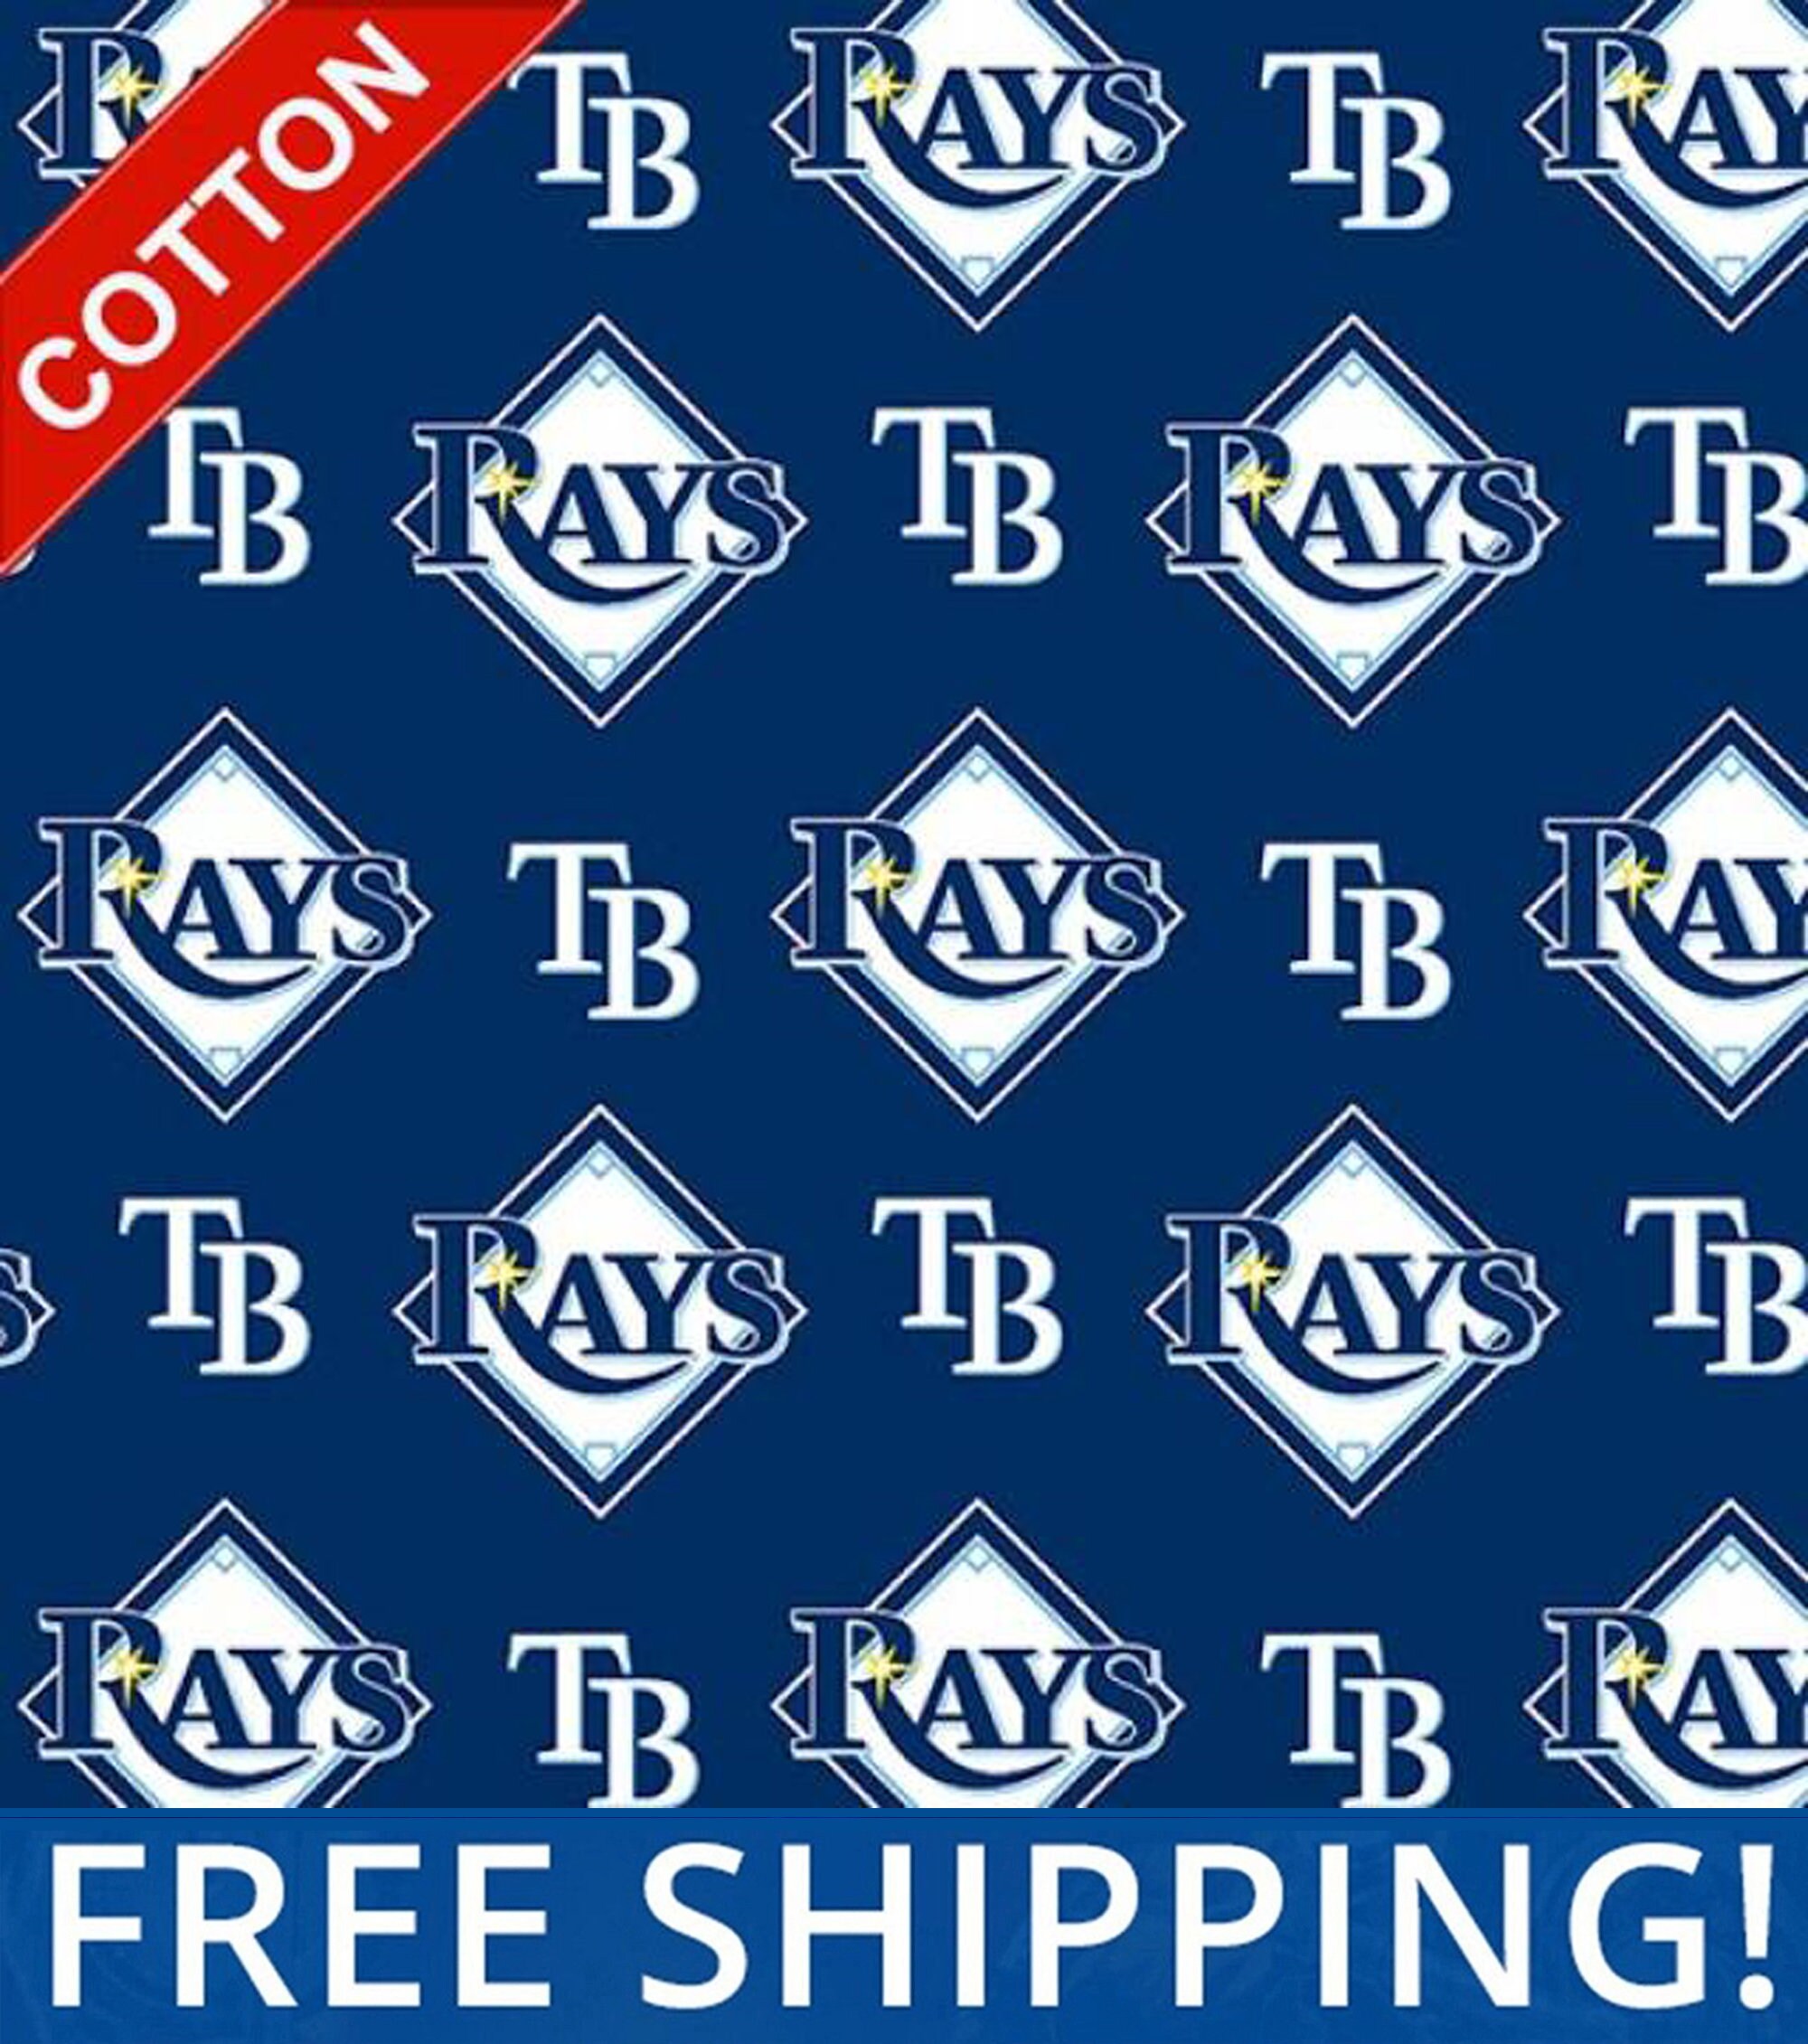 100+] Rays Wallpapers